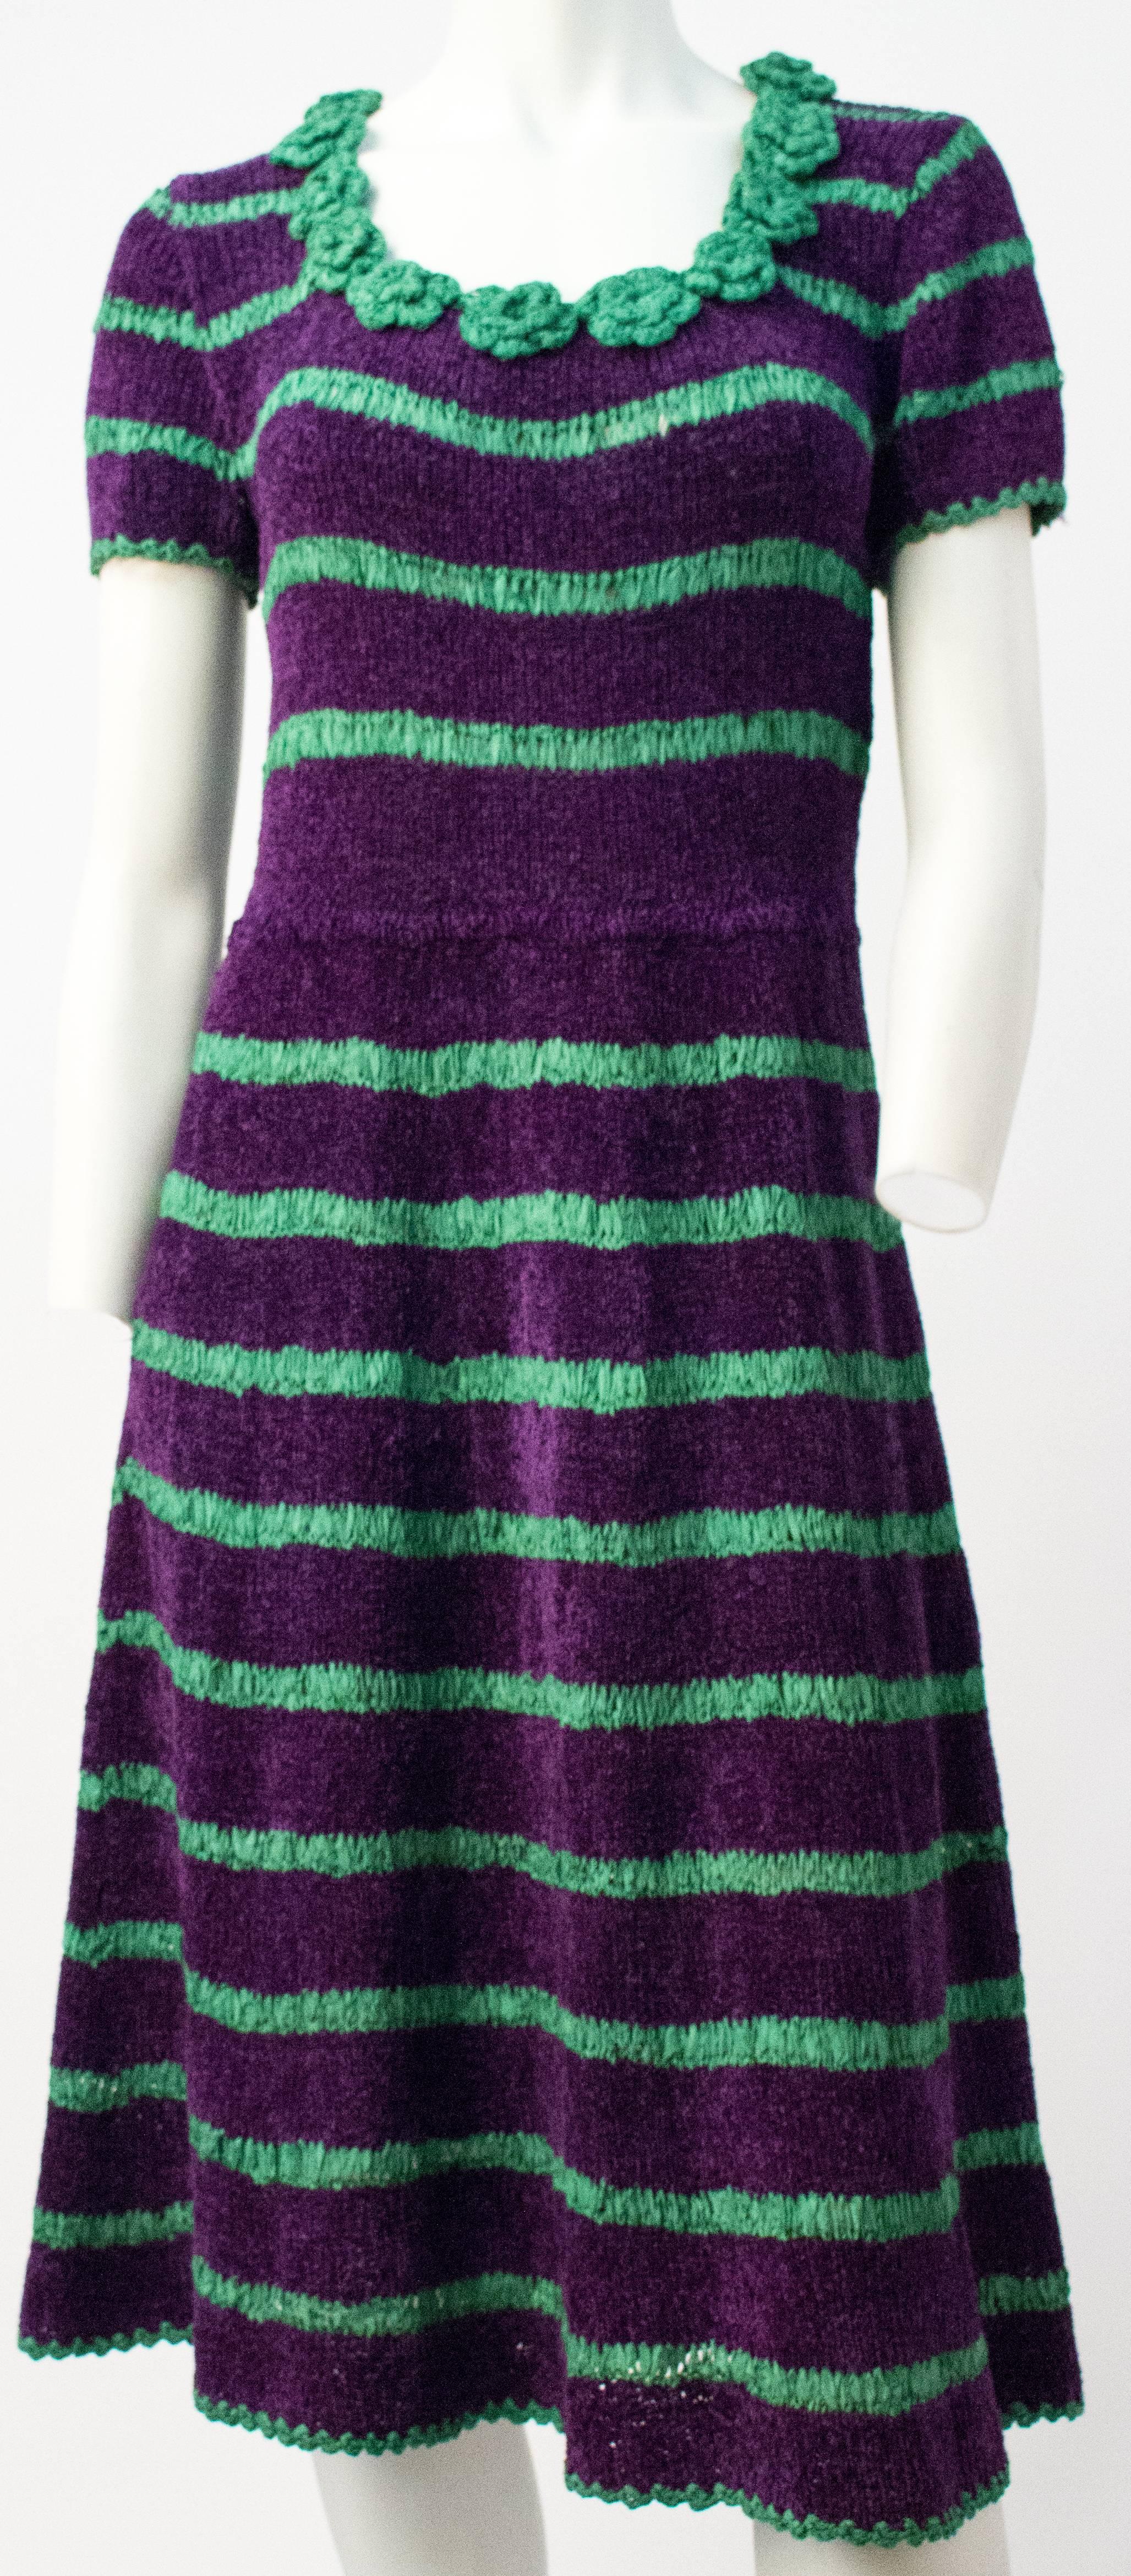 40s Green and Purple Stripe Chenille Yarn and Ribbonwork Dress. Handmade. No closures. Ribbon work flower neck detail. Aprox. US women's size 8-12.

26